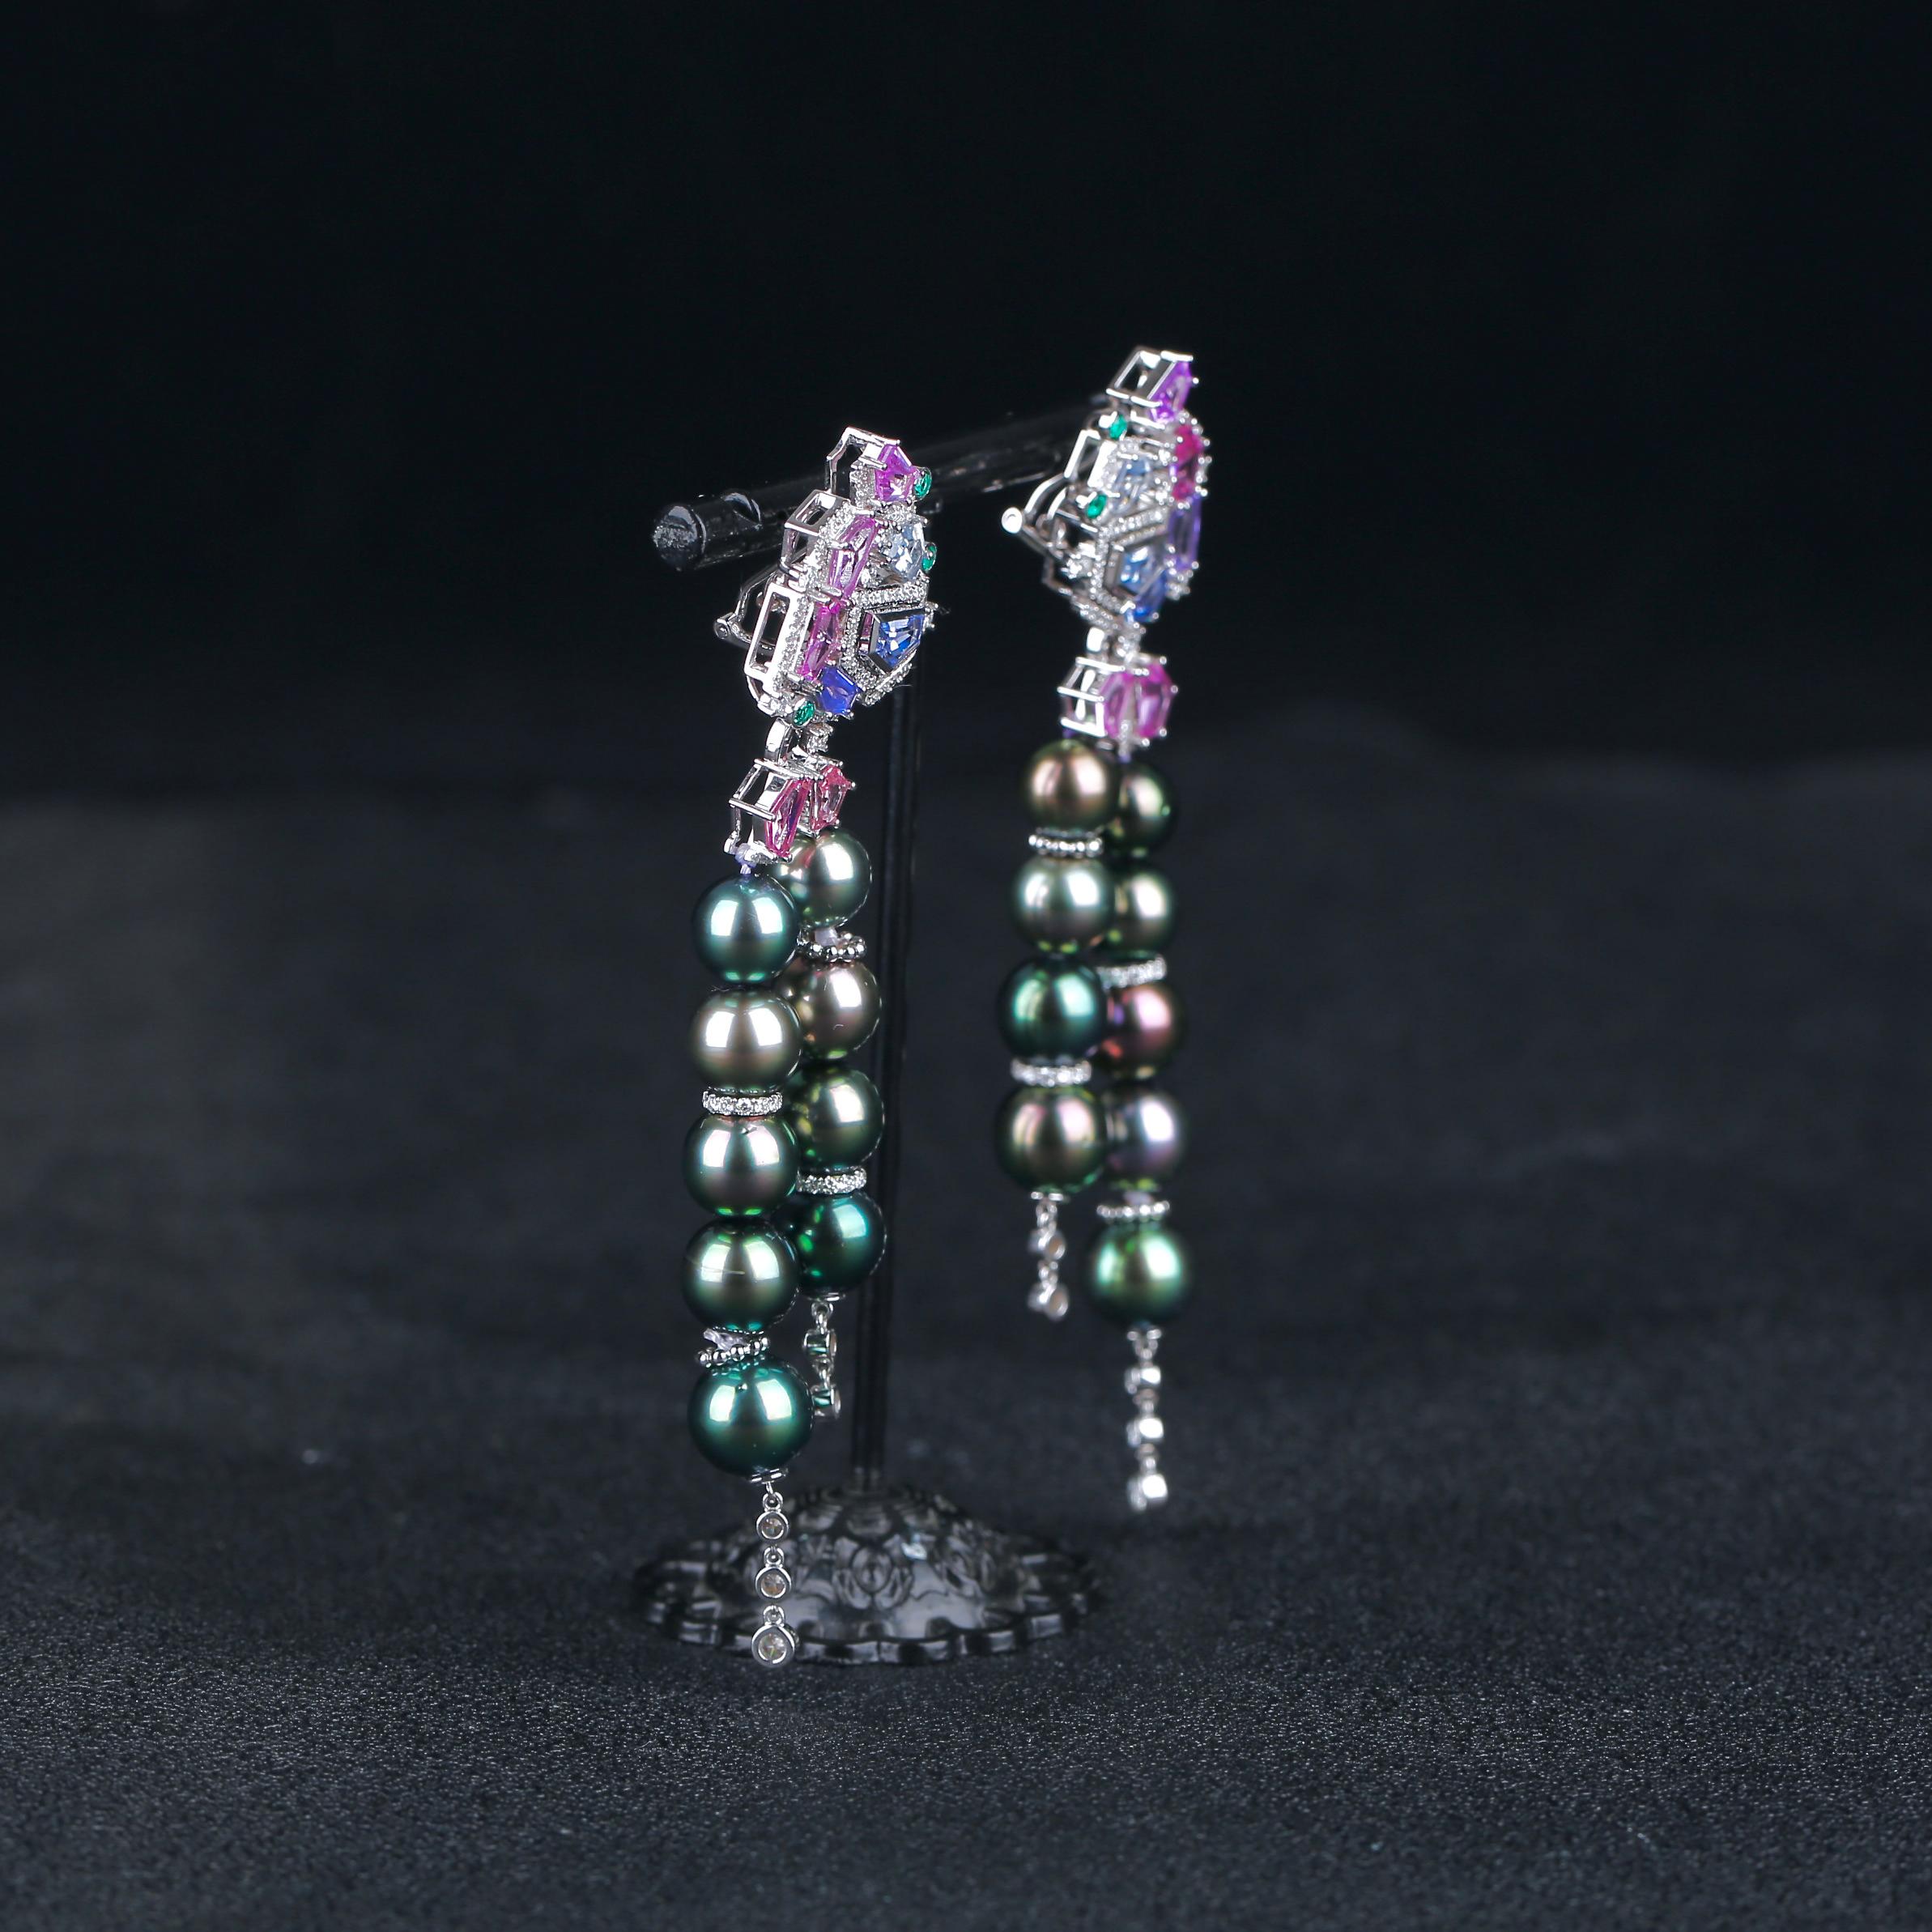 This is a very unique chandelier dangle earring. The whole earring is consists of the top Party Colour Sapphire Ear Stud and the bottom Multi Colour Tahitian Pearls and Diamond Chandelier. You could wear the Sapphire ear stud by itself, as it is